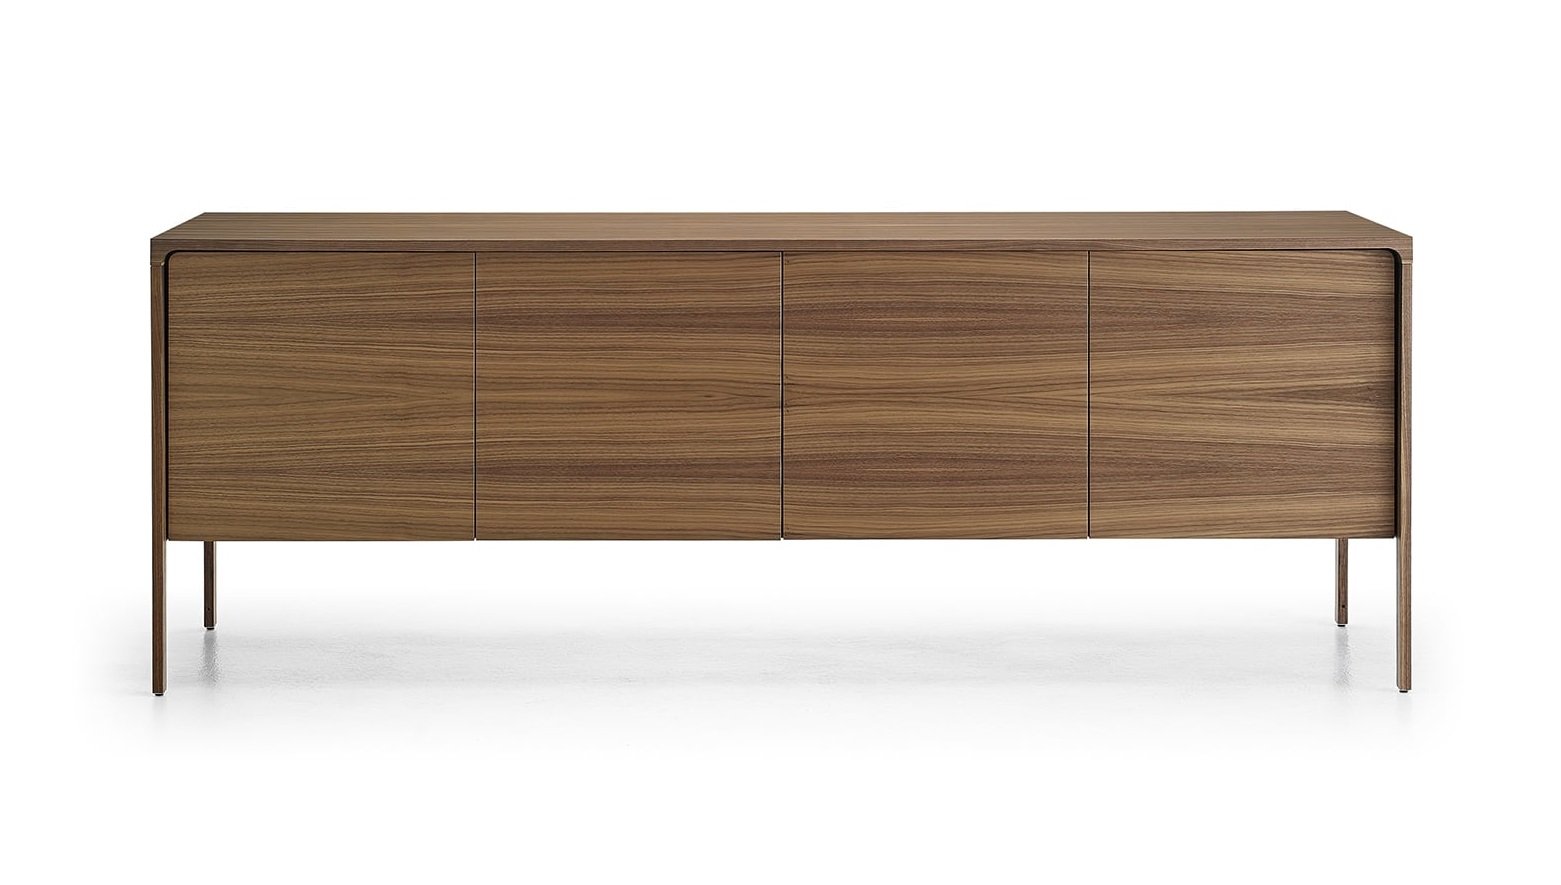 Tactile Sideboard from Punt Mobles, designed by Terence Woodgate